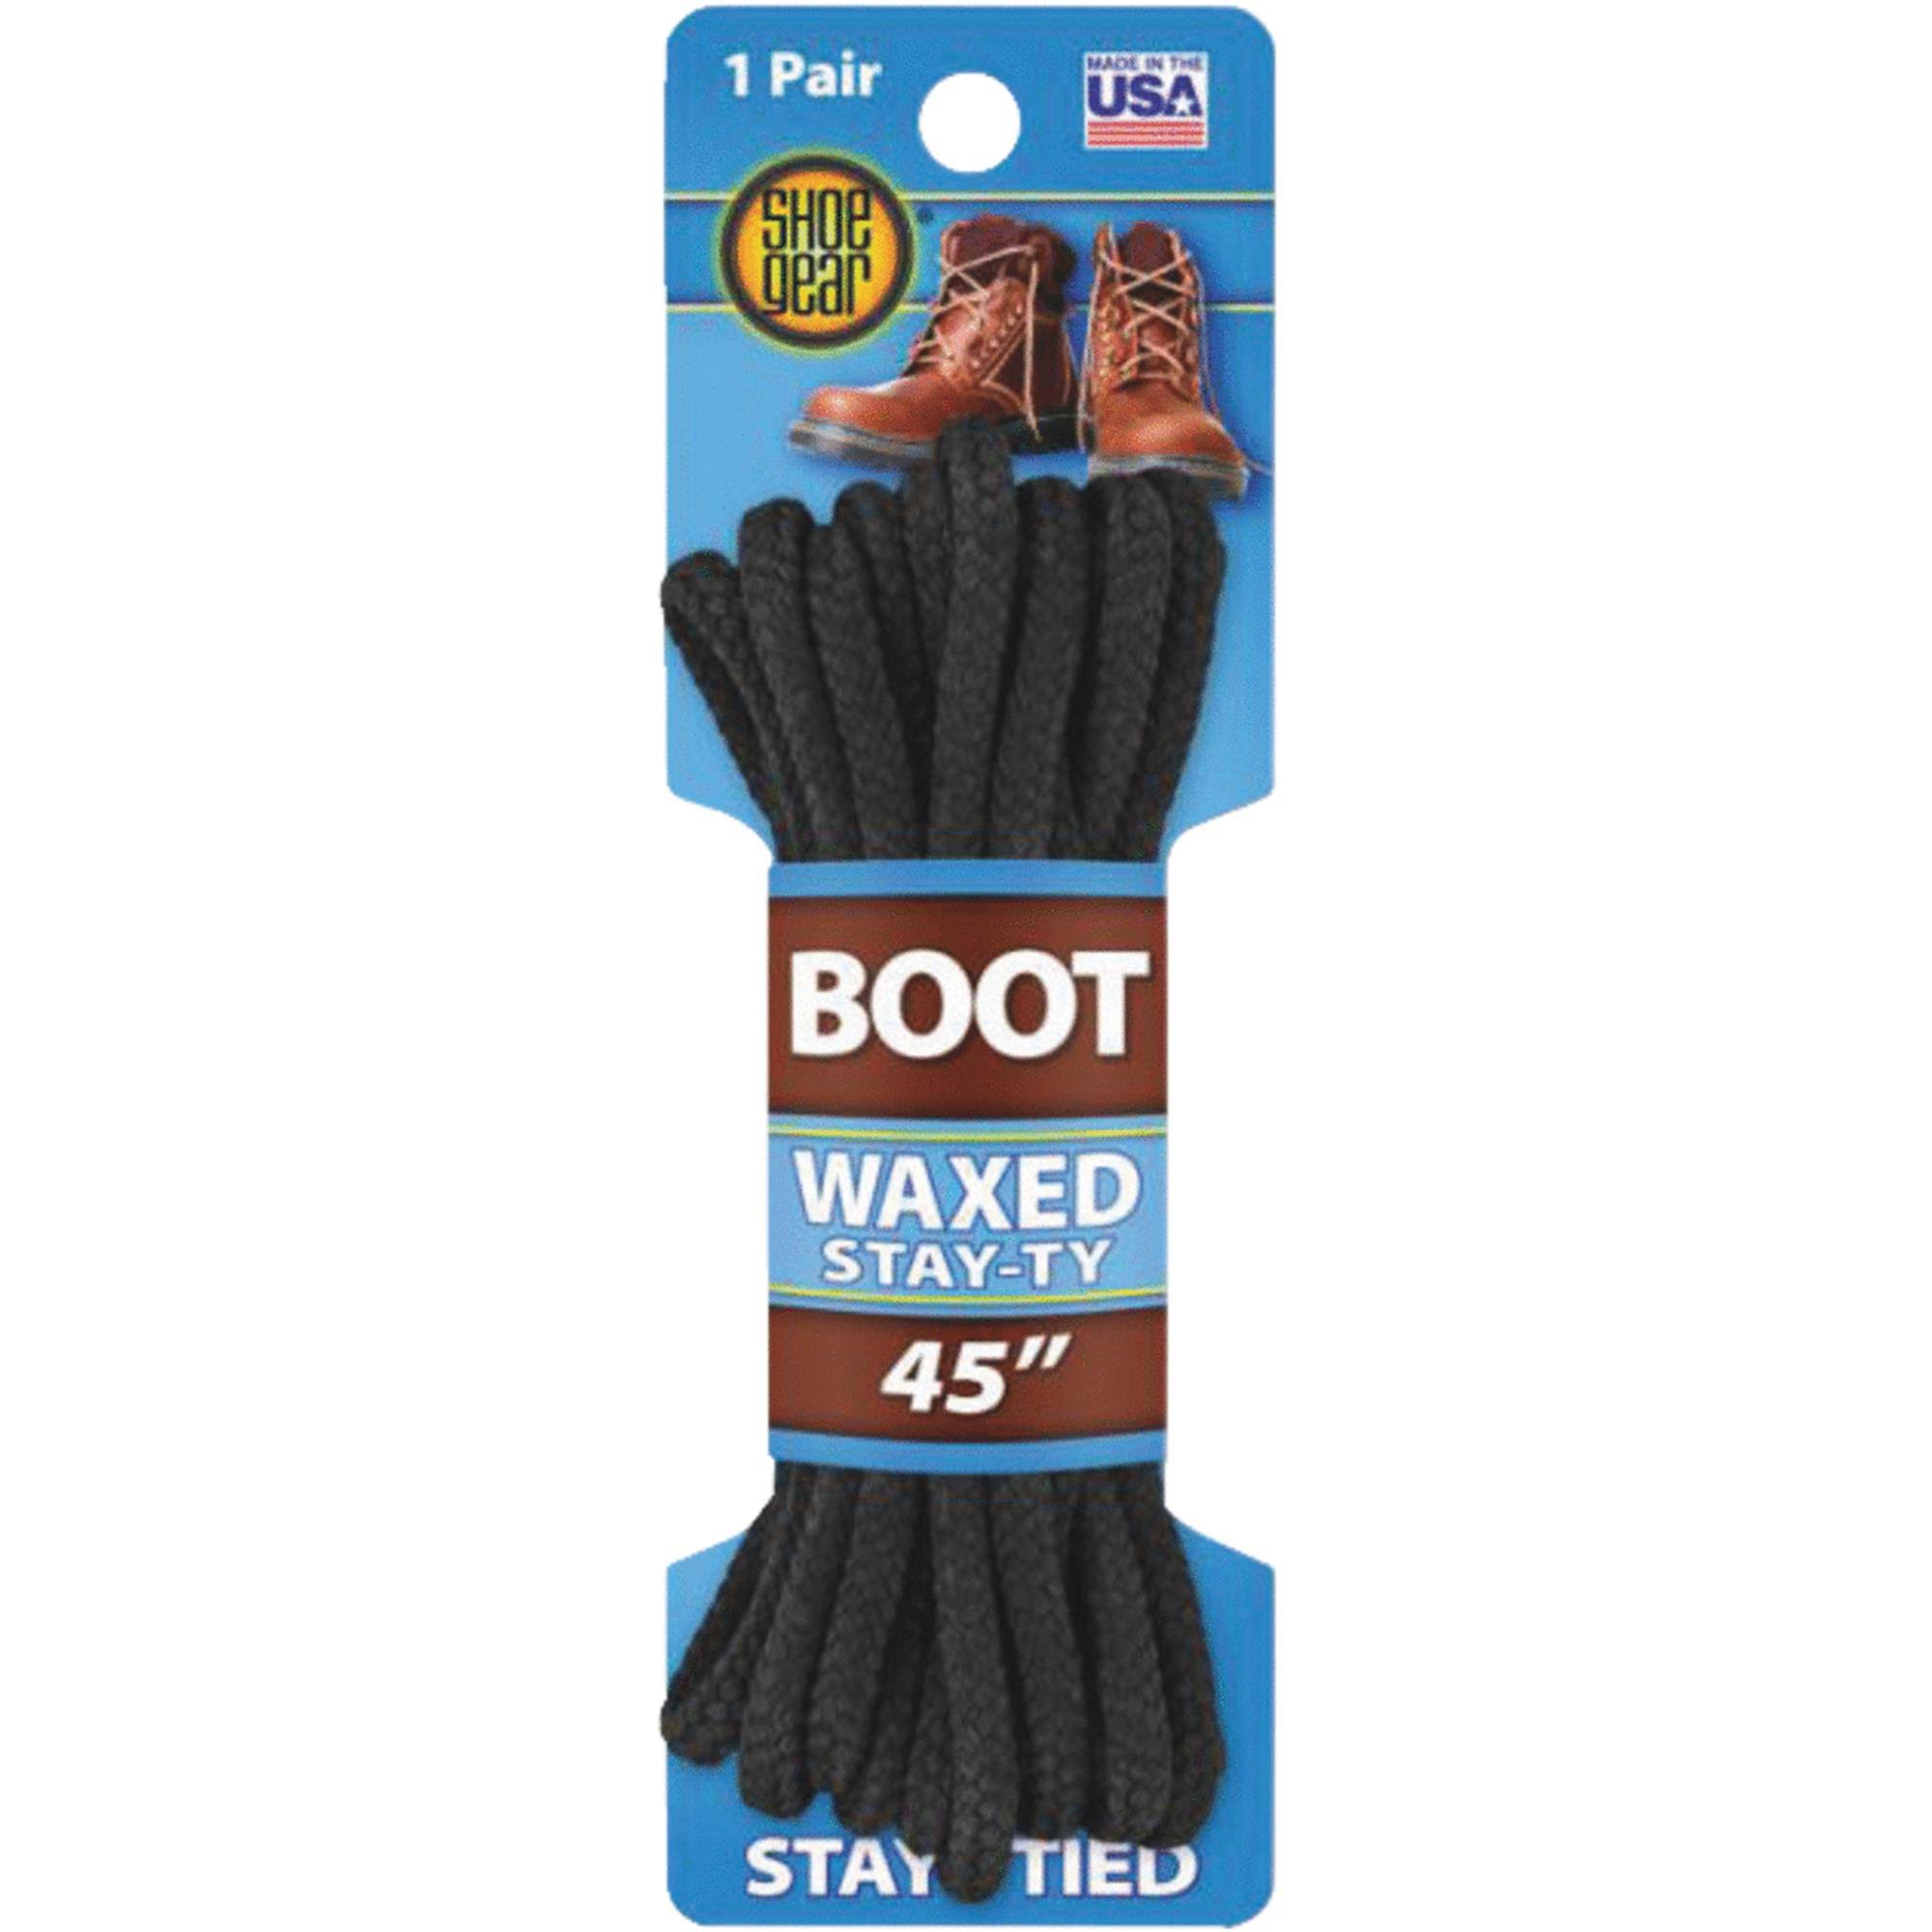 Shoe Gear Boot Lace - 1 Pair, 45"